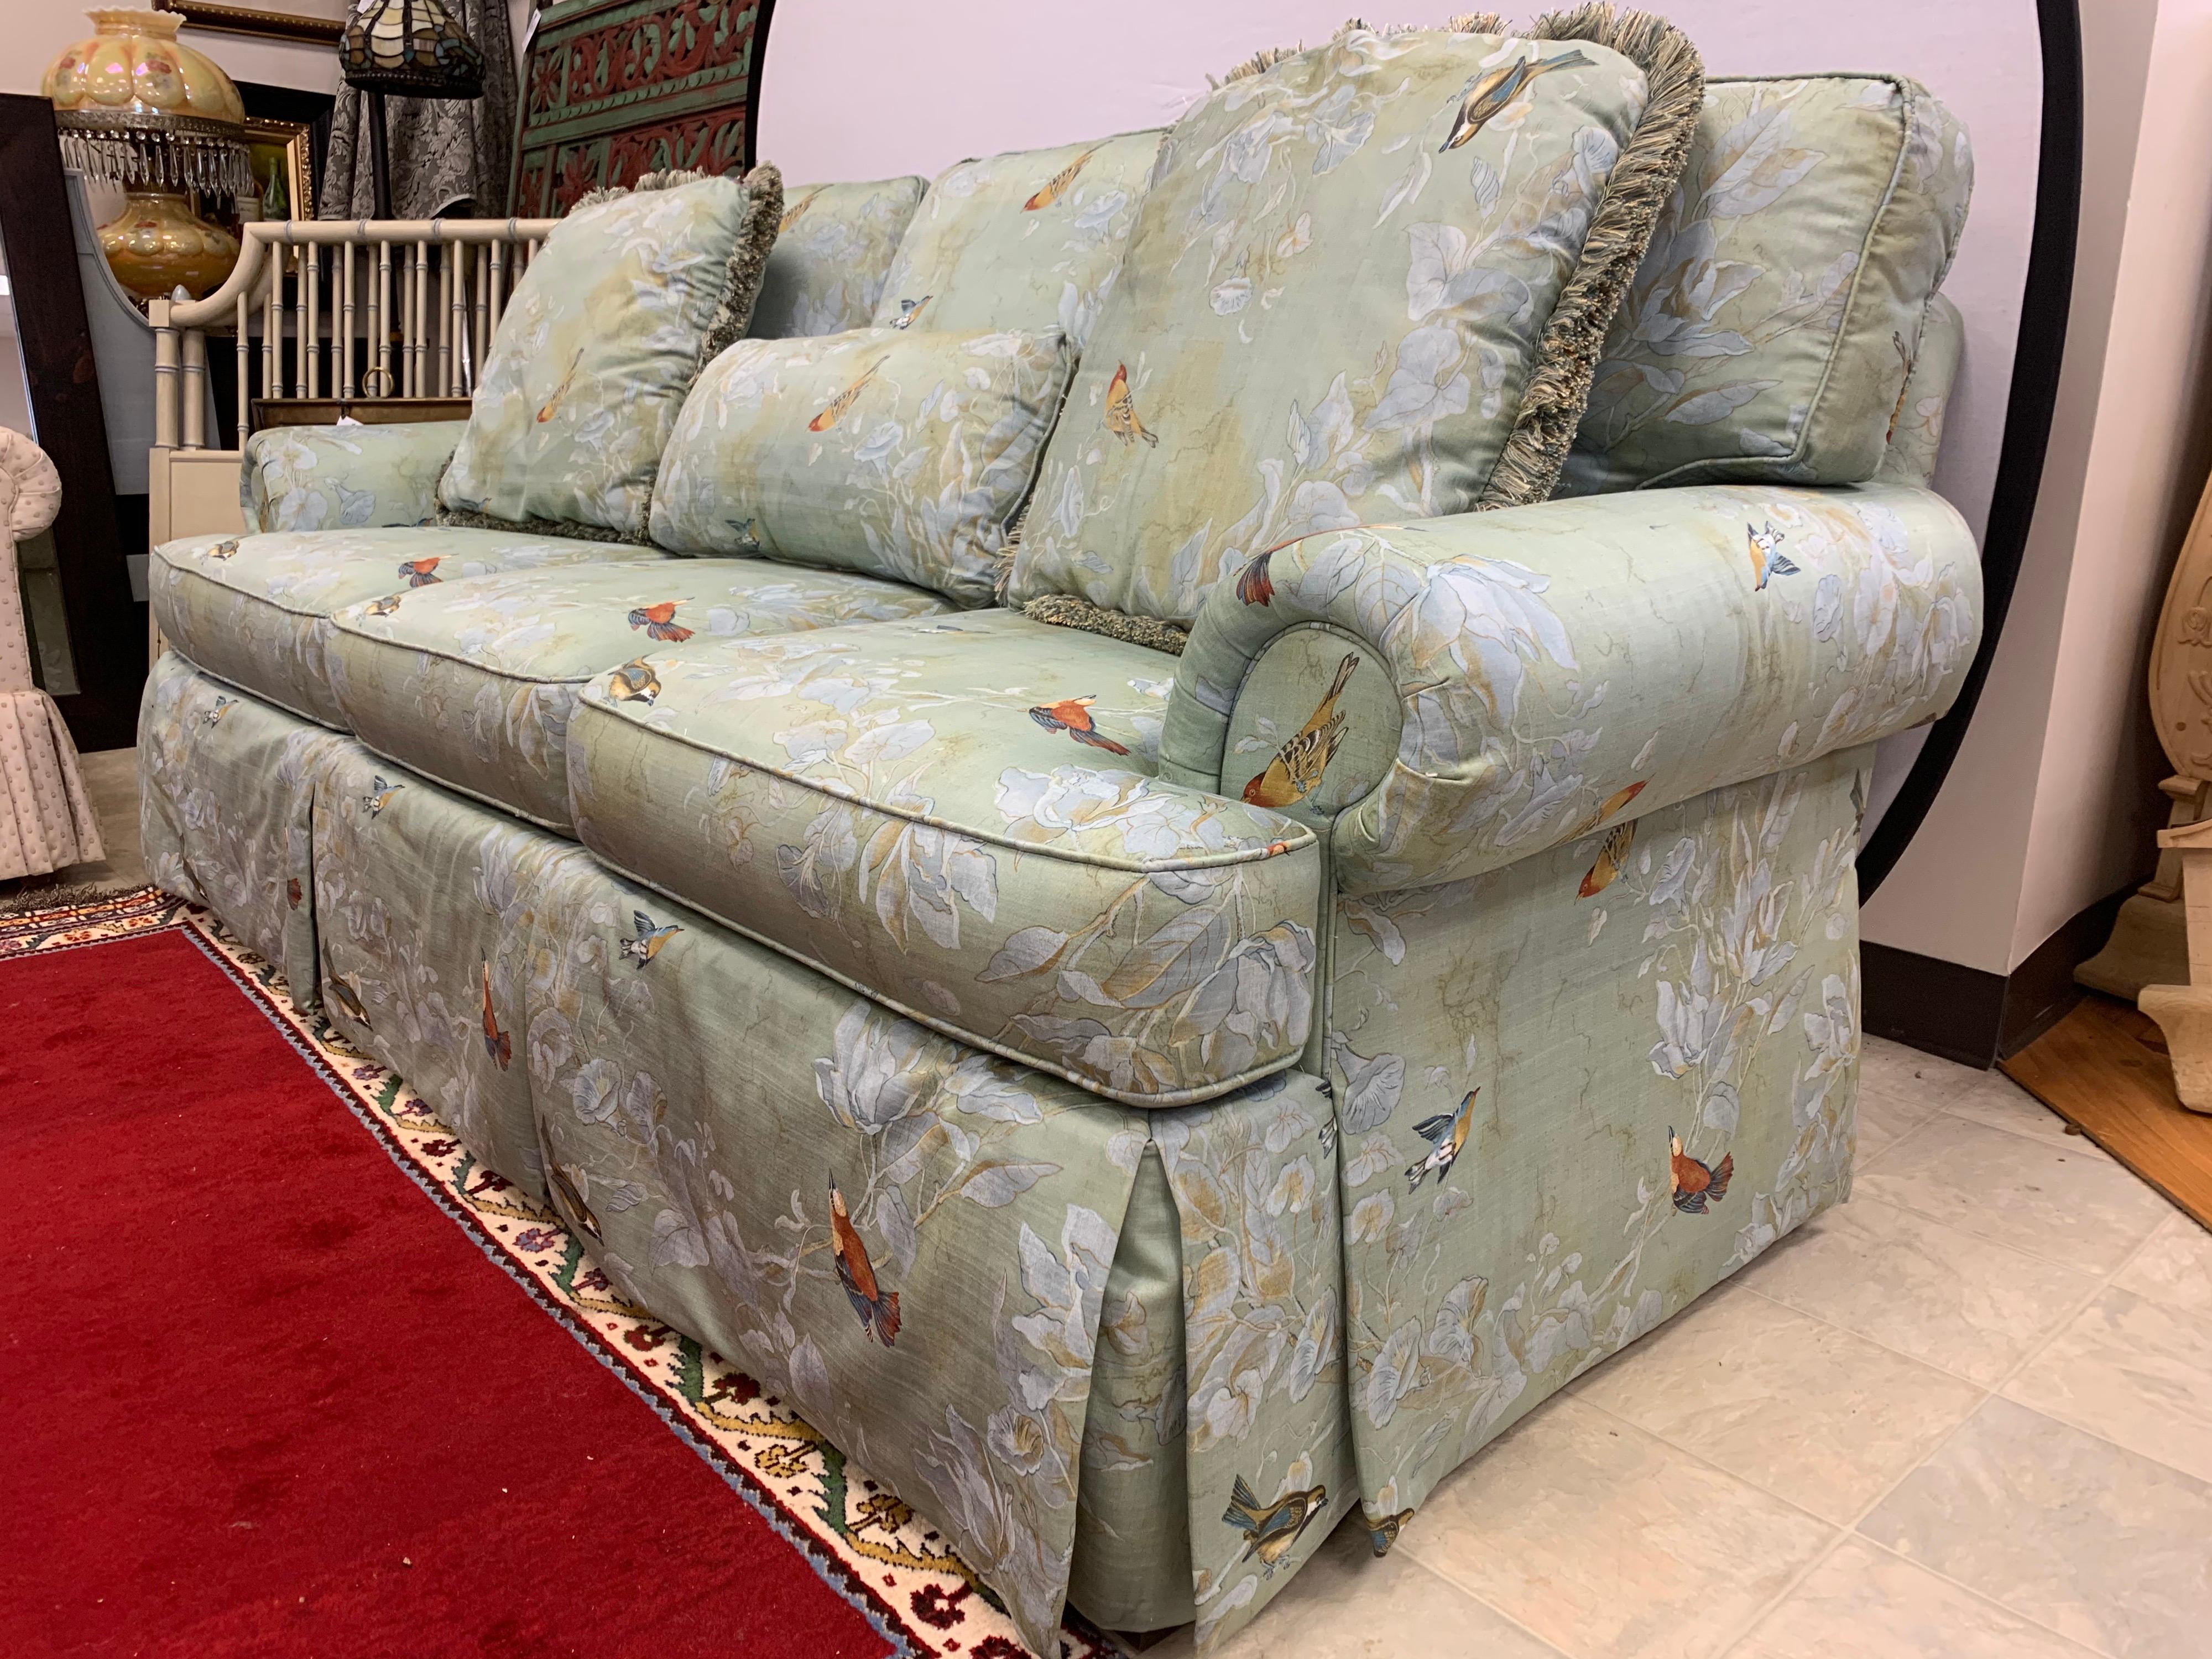 80s floral couch